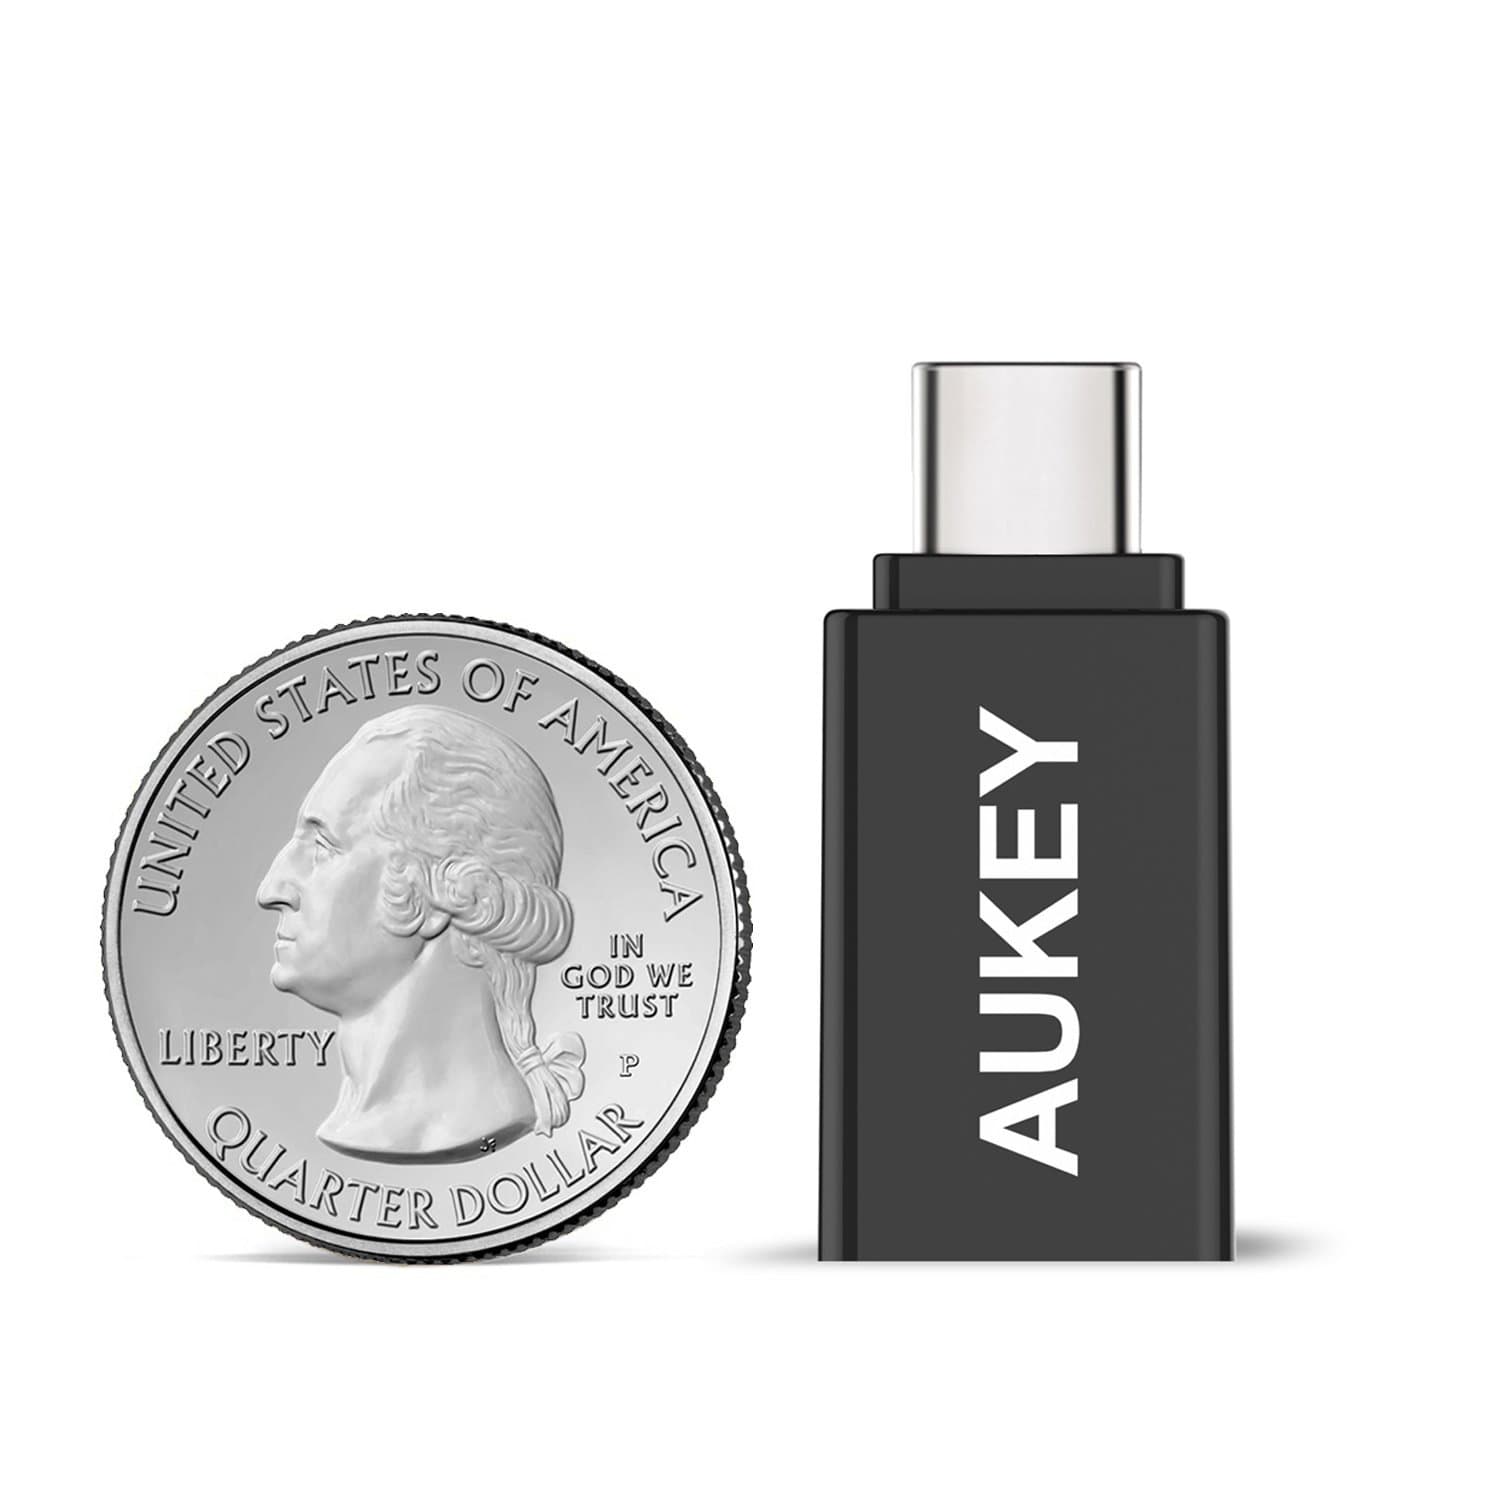 AUKEY CB-A1 USB 3.0 A to C Adapter (2 Pack) - Aukey Malaysia Official Store